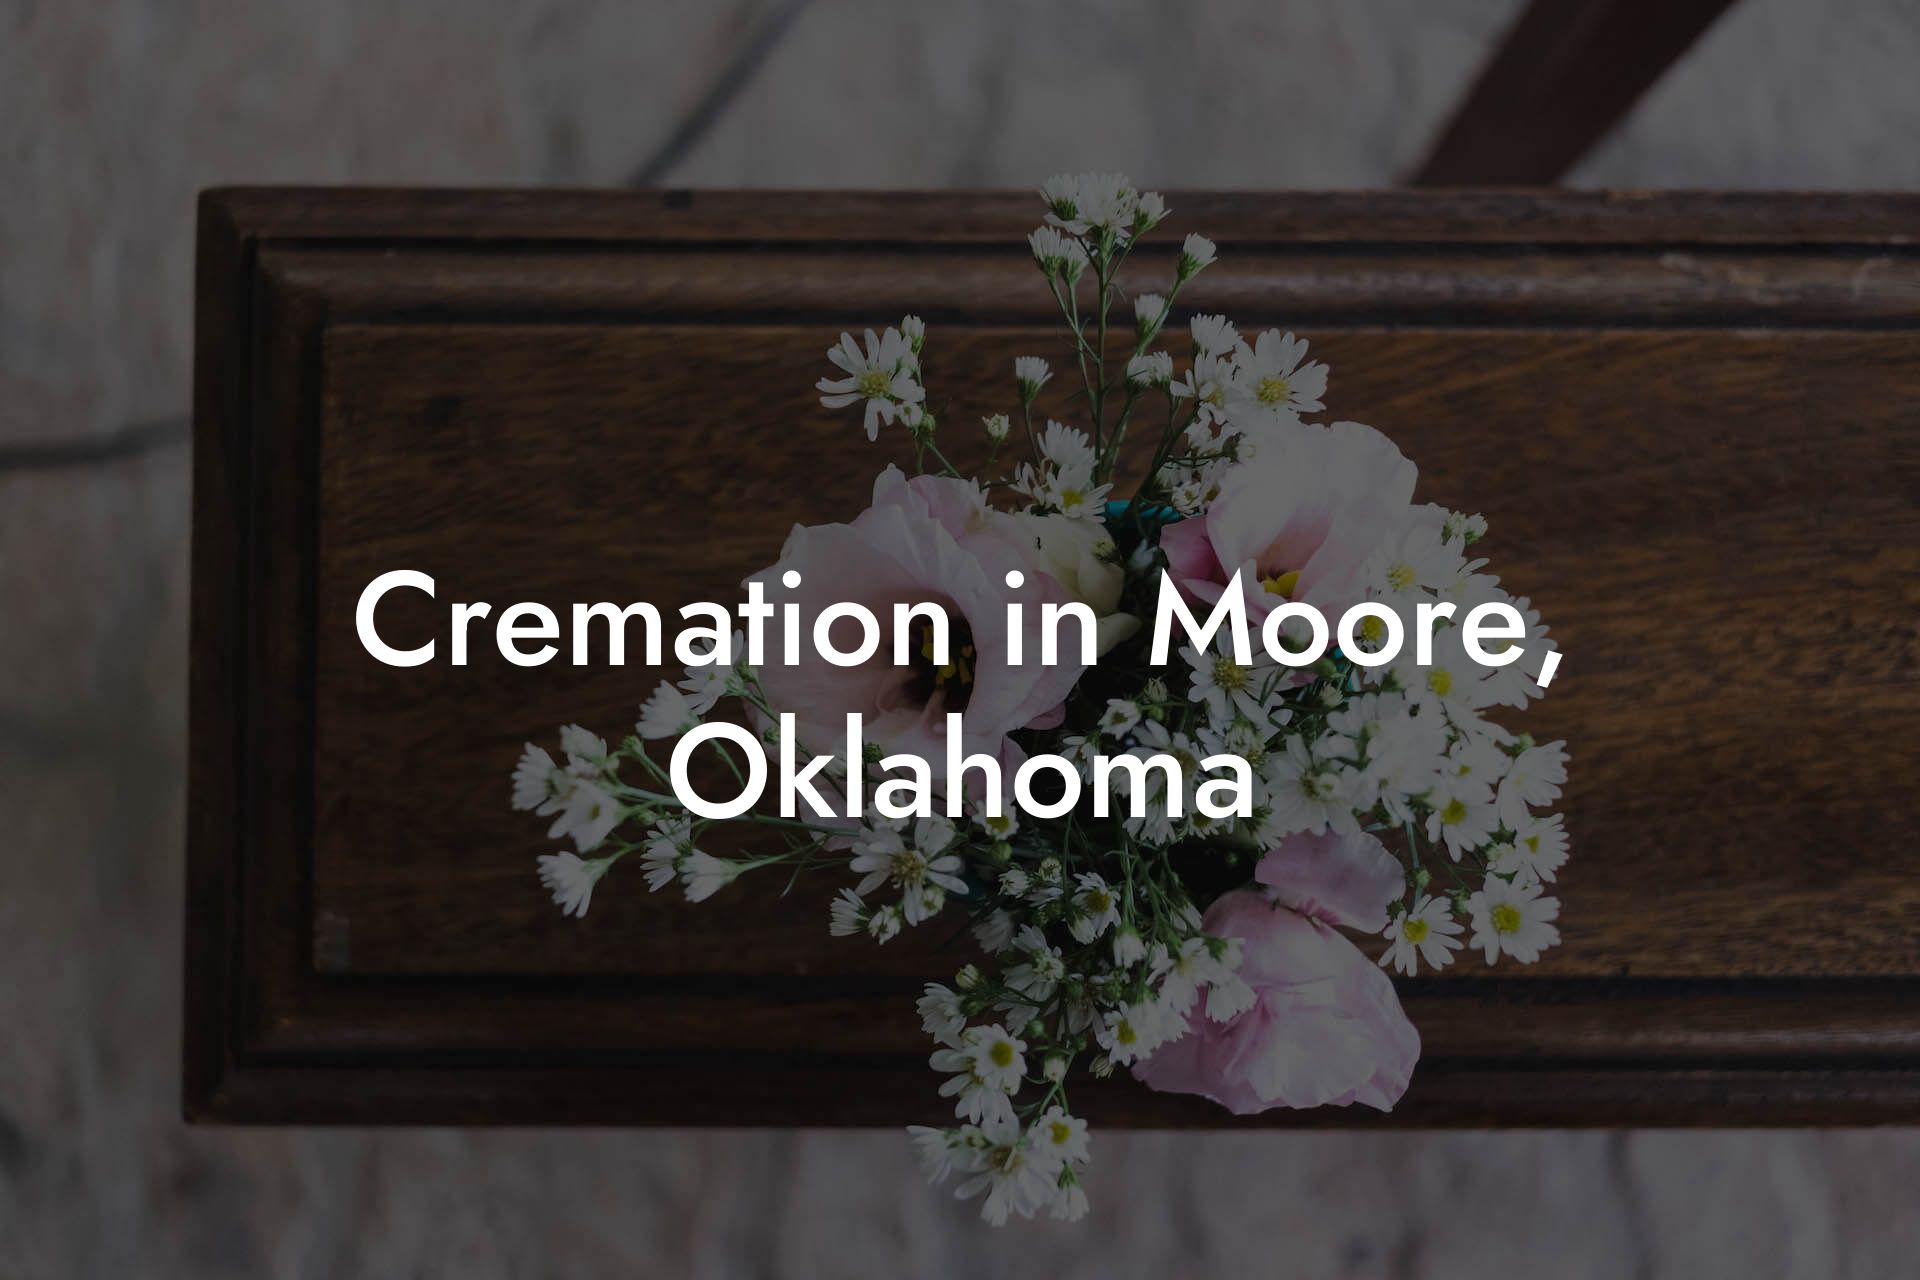 Cremation in Moore, Oklahoma